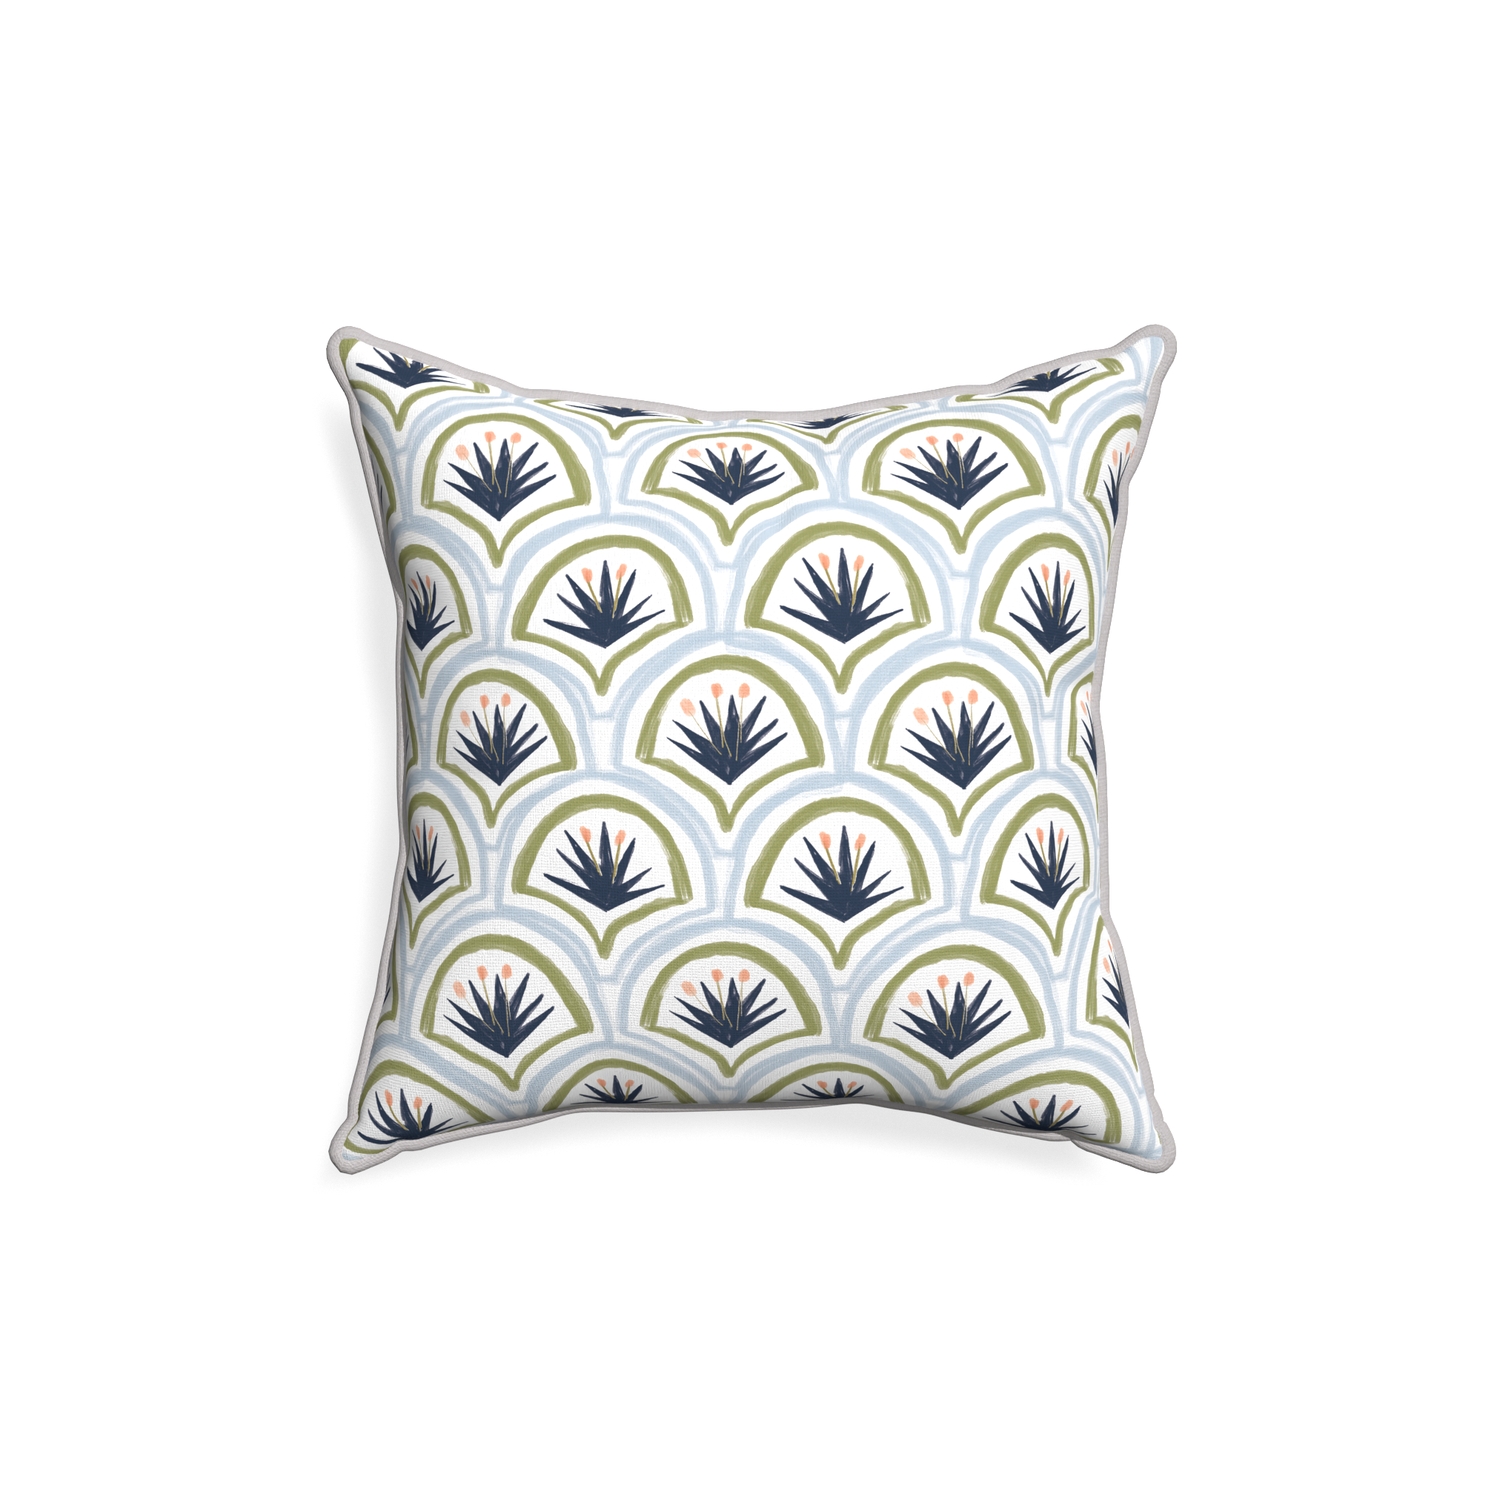 18-square thatcher midnight custom art deco palm patternpillow with pebble piping on white background